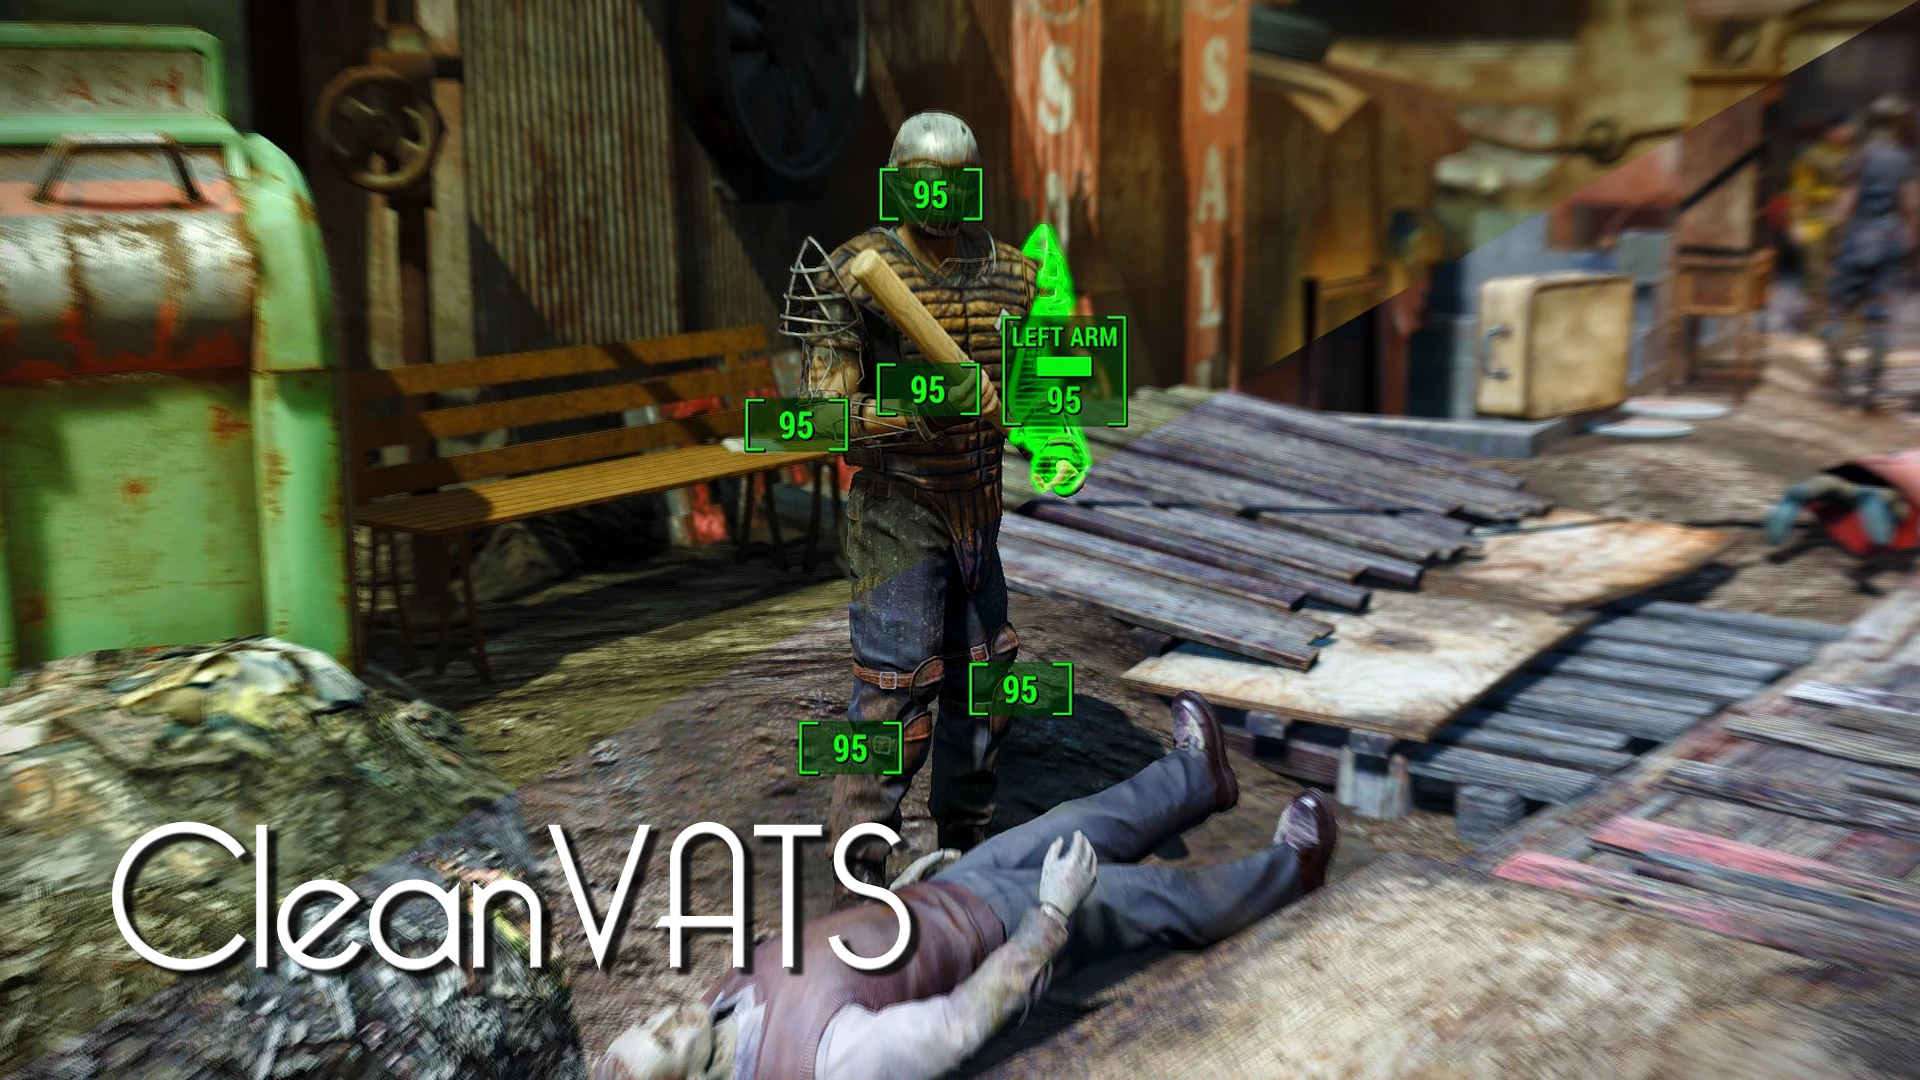 fallout 4 corpse removal mod